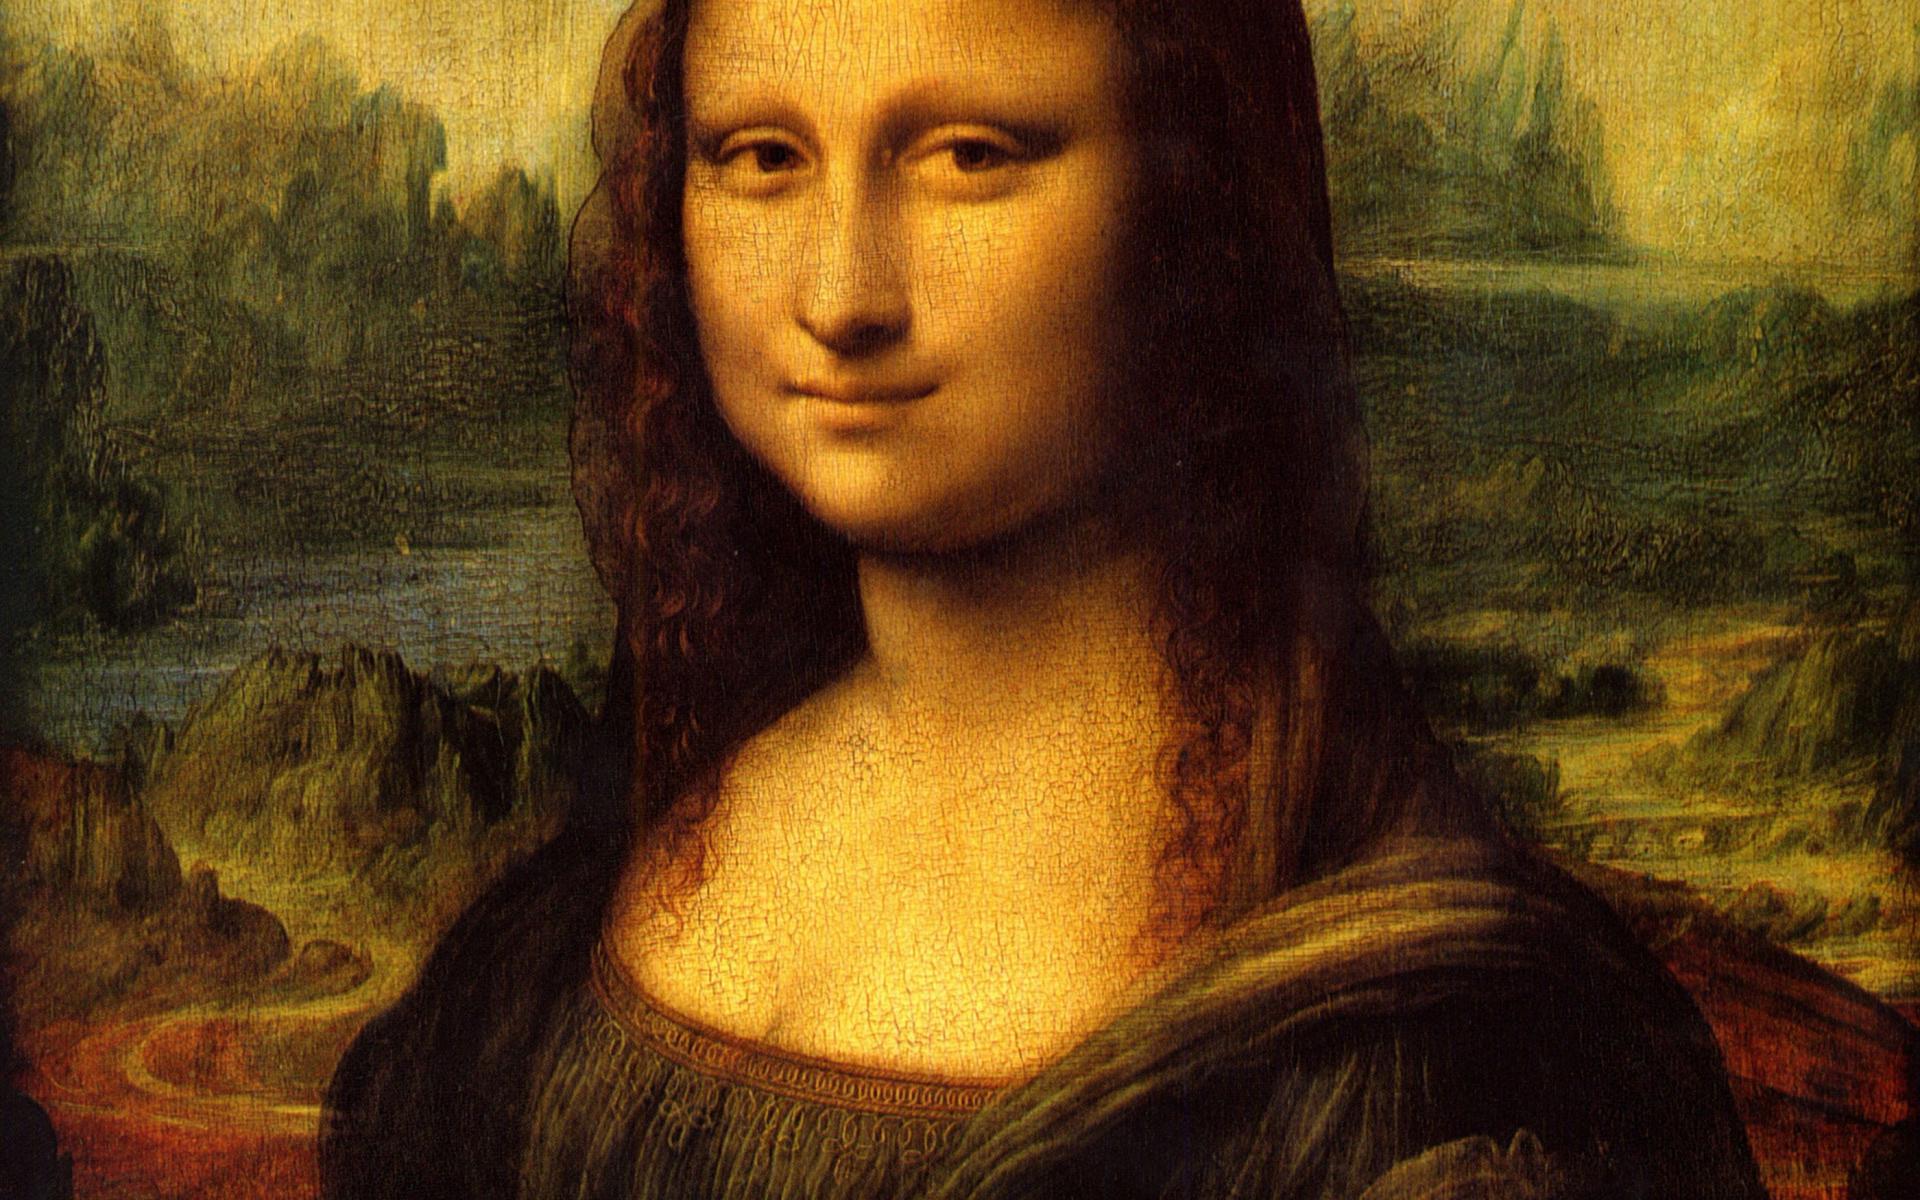 The Artistic Revolutions and Optical Illusions of the Mona Lisa